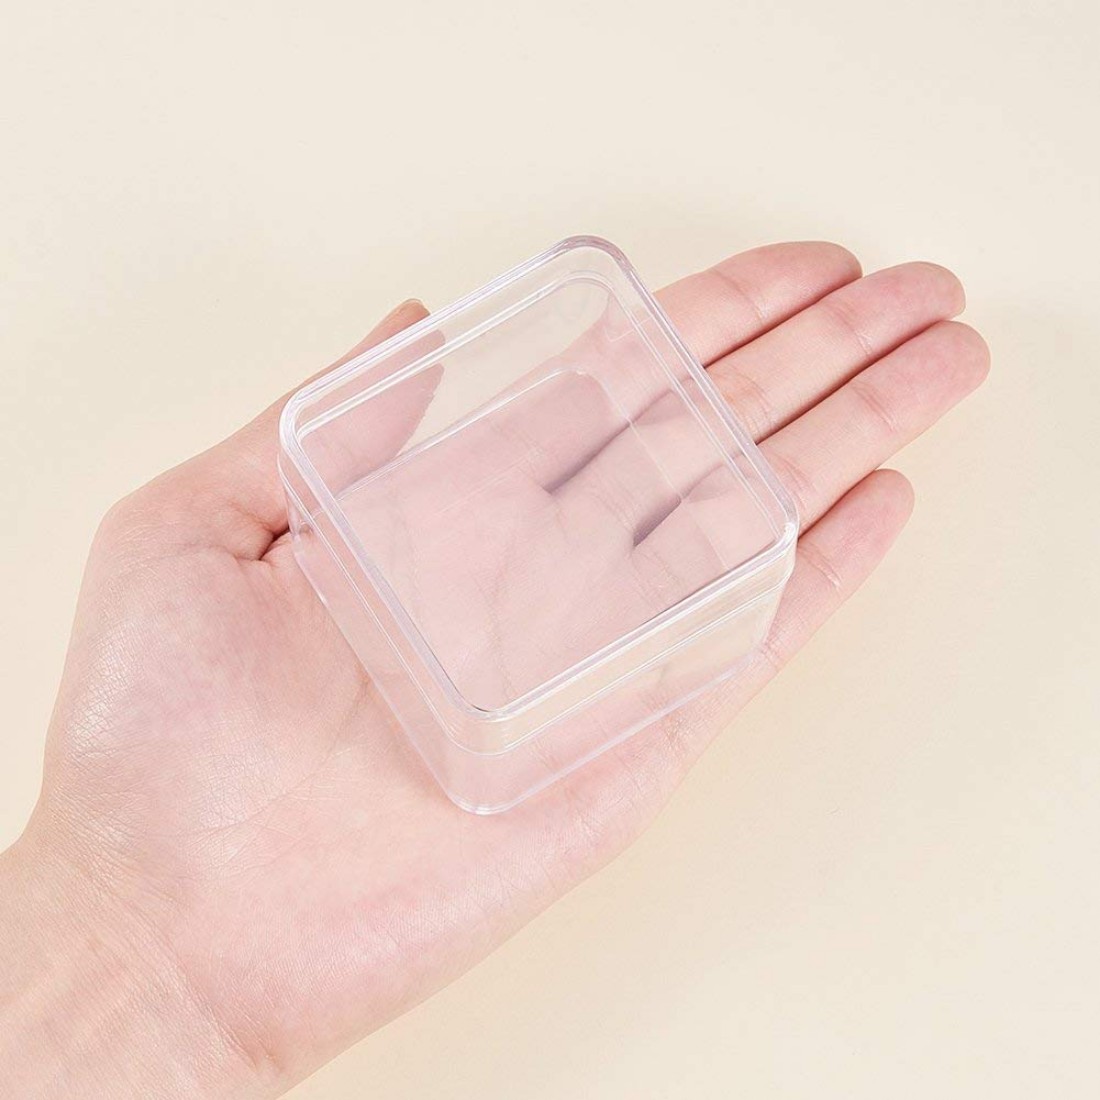 Buy DIY Crafts Square Shape Transparent Storage Container for Small ...